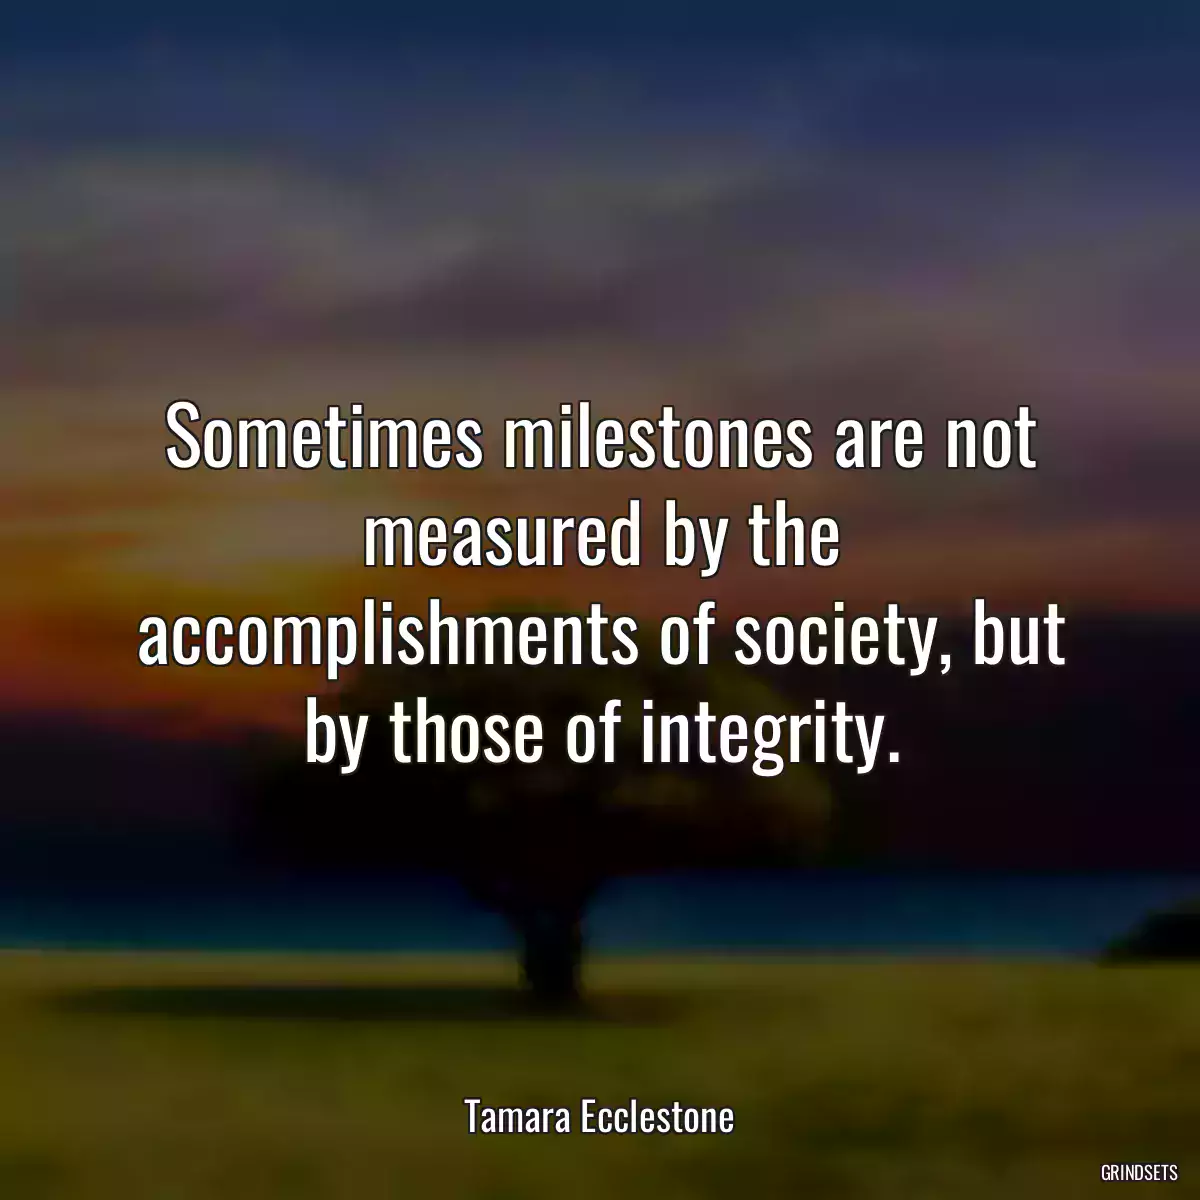 Sometimes milestones are not measured by the accomplishments of society, but by those of integrity.